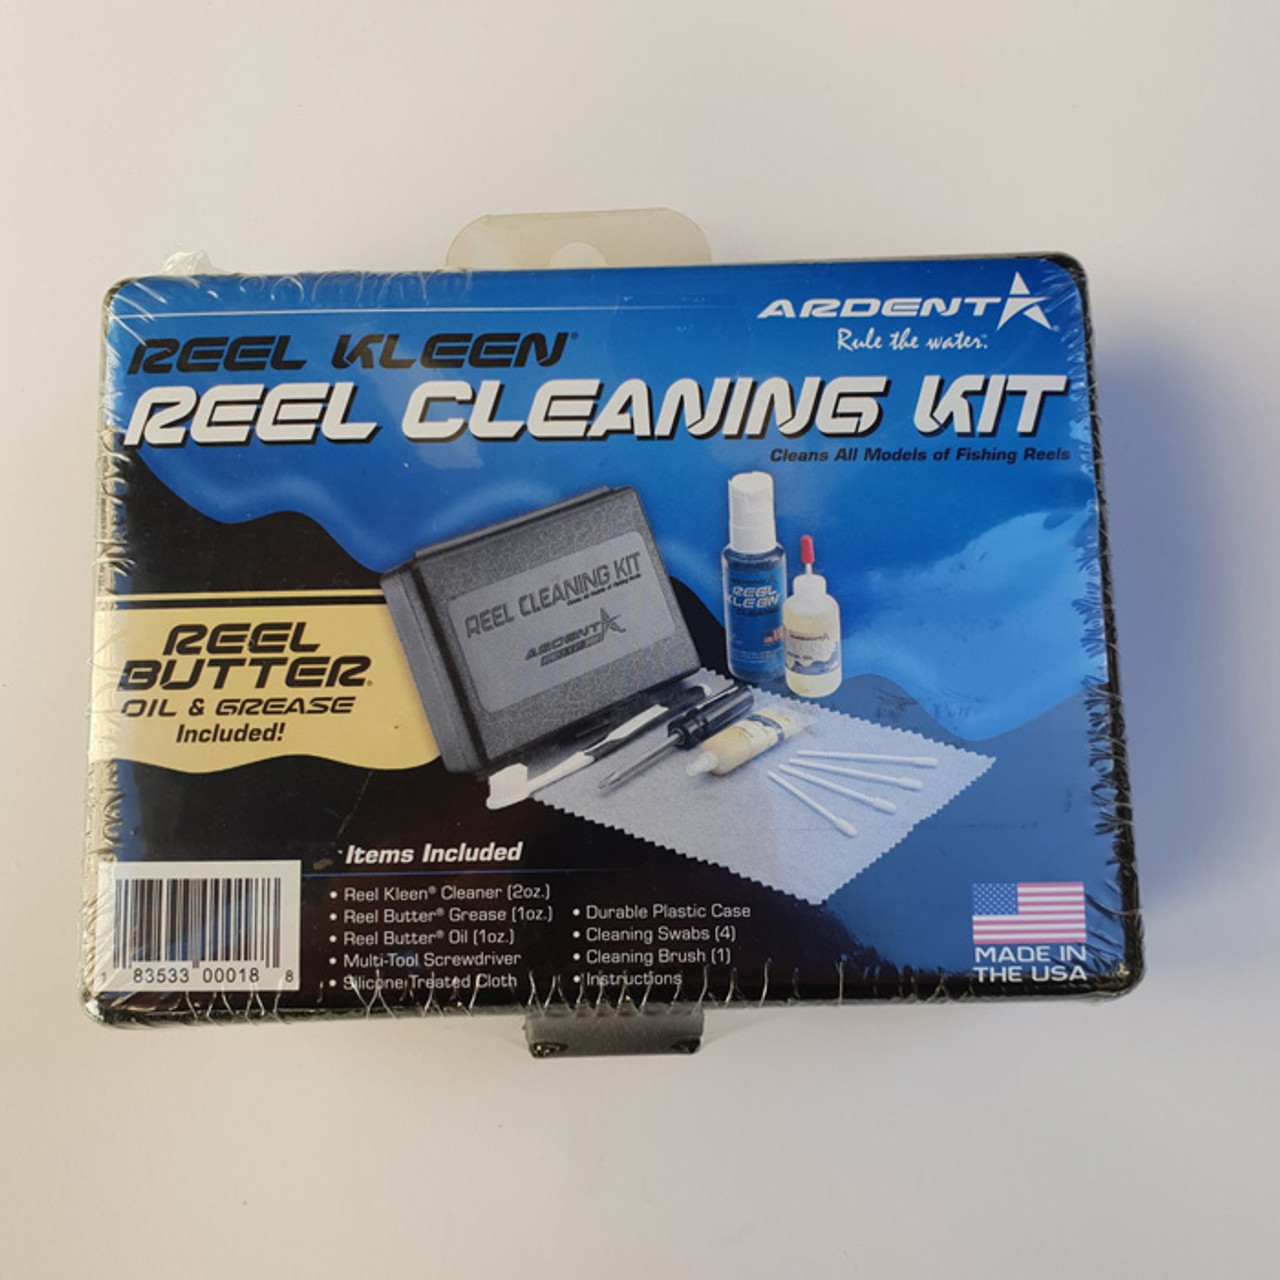 Ardent Reel Cleaning Kit - Armadale Angling